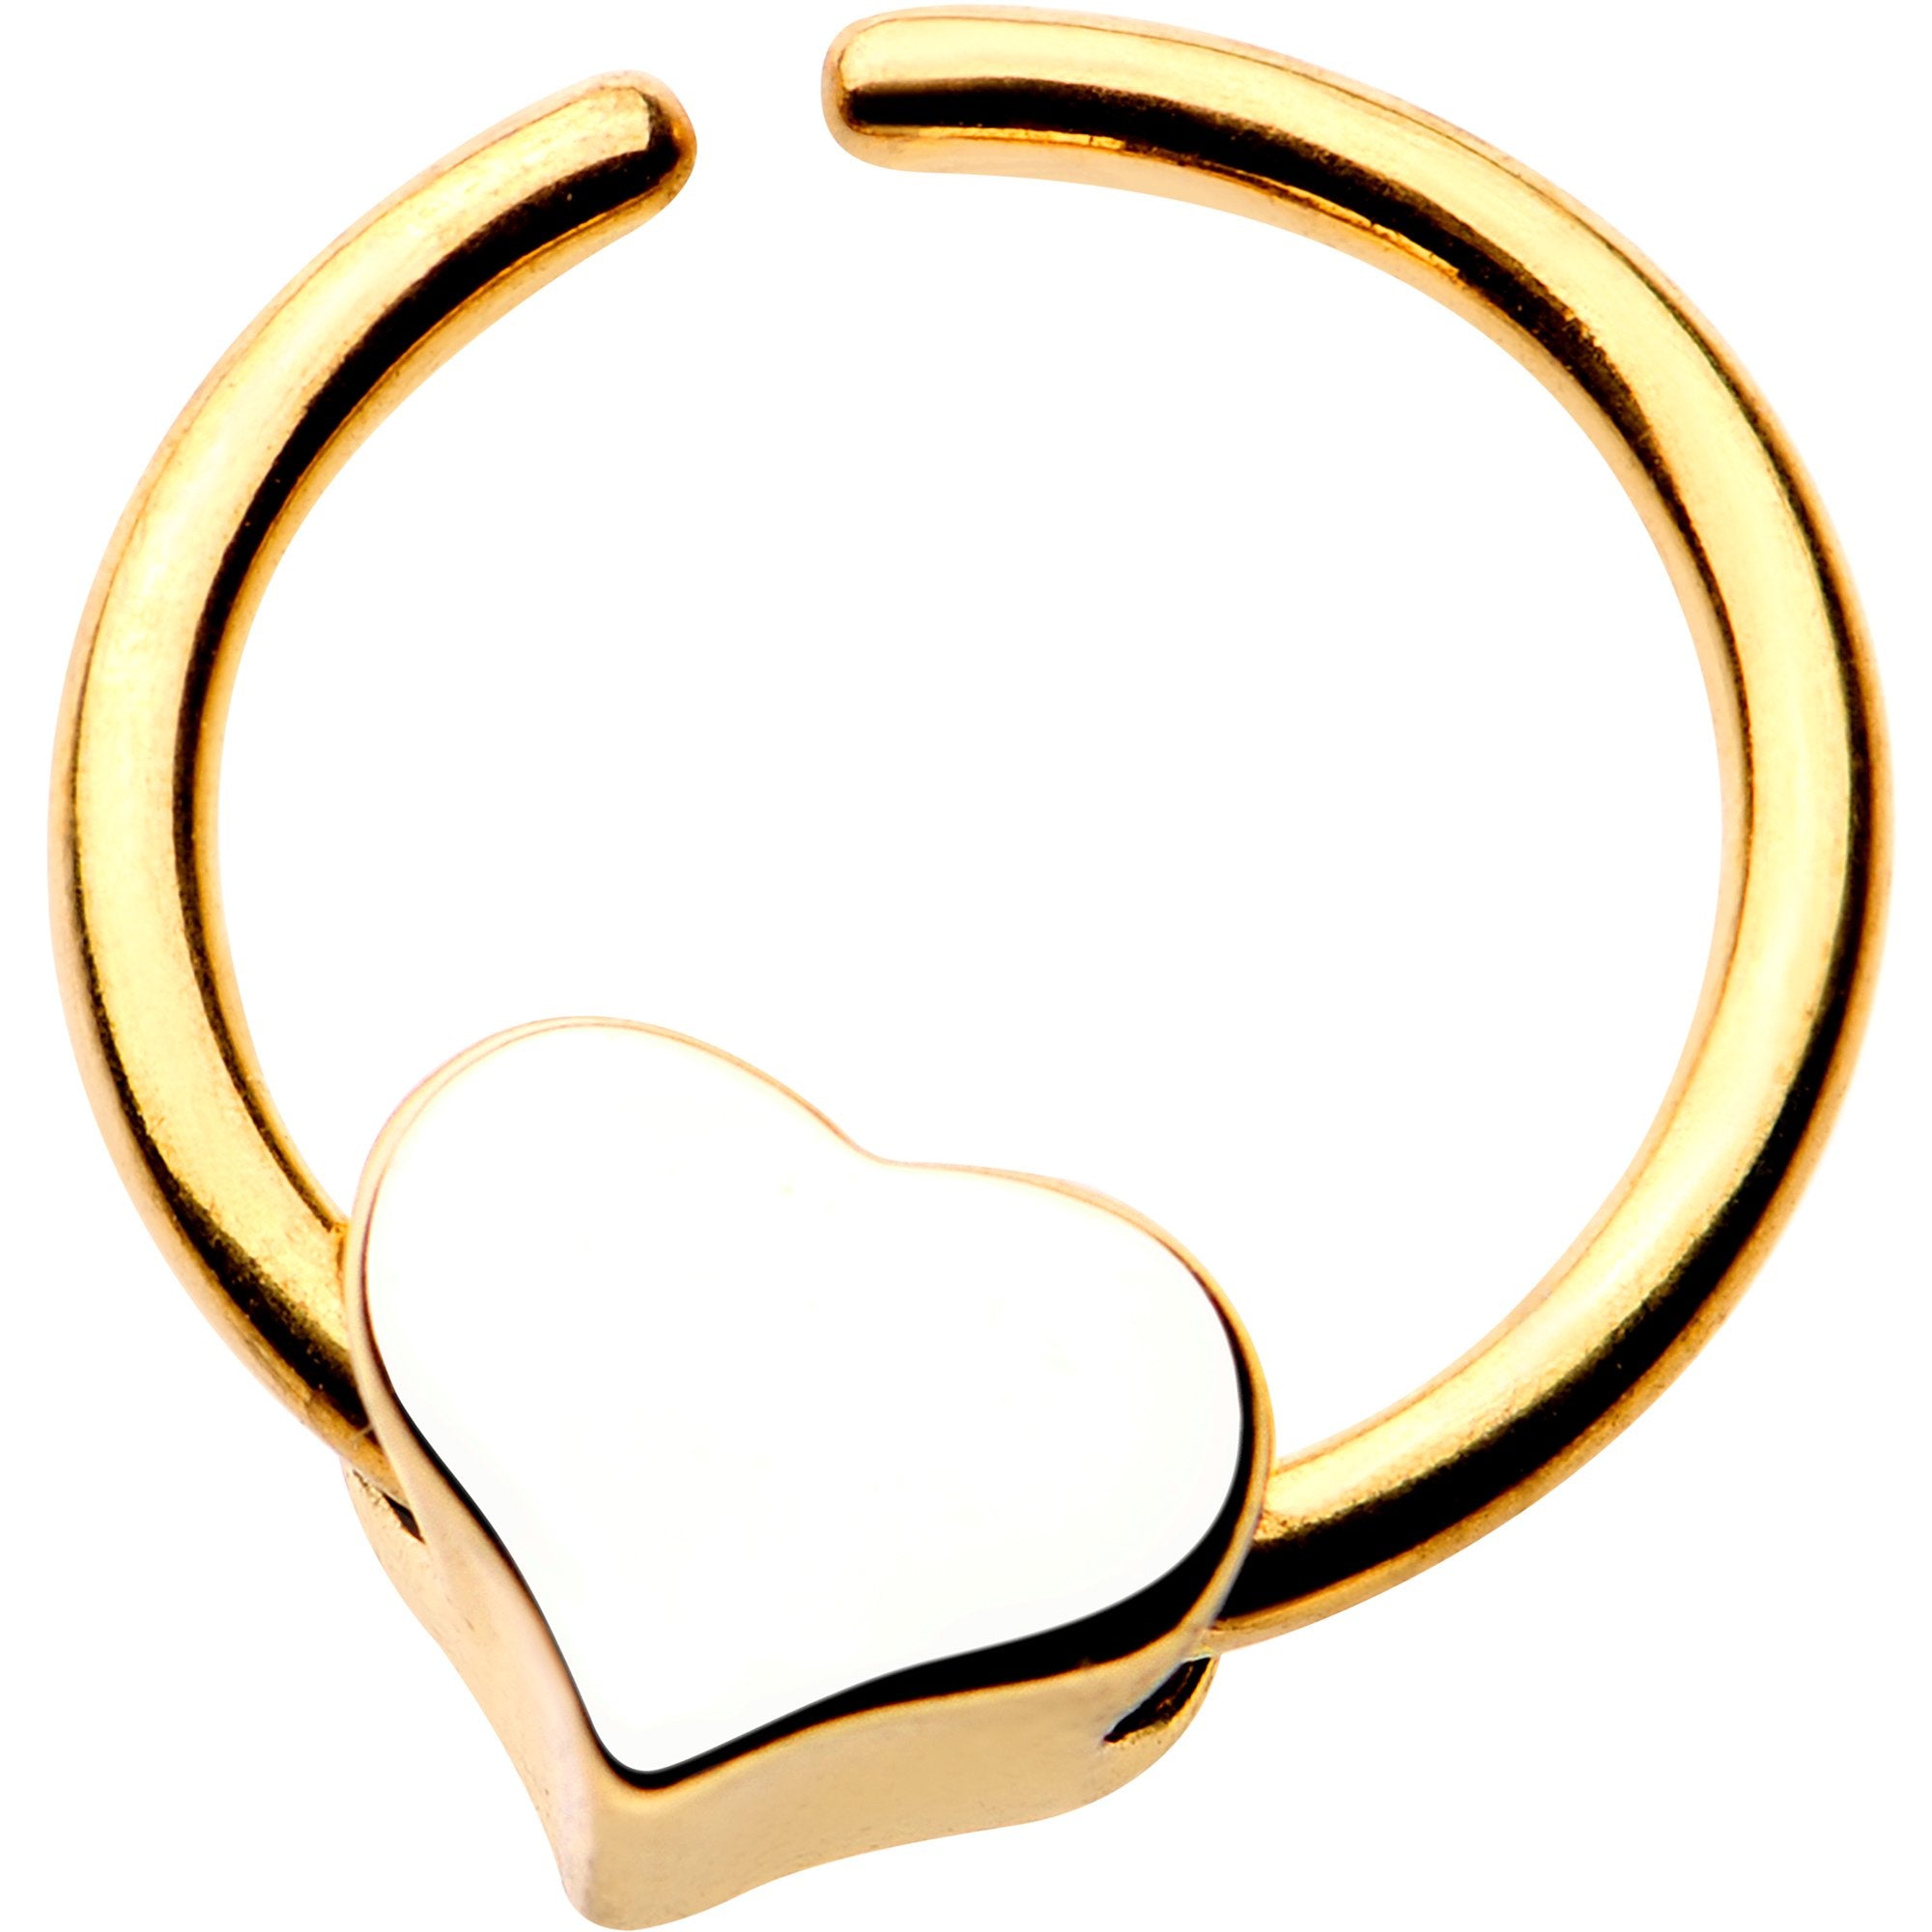 18 Gauge 5/16 Annealed Gold Tone Curved Heart Seamless Circular Ring